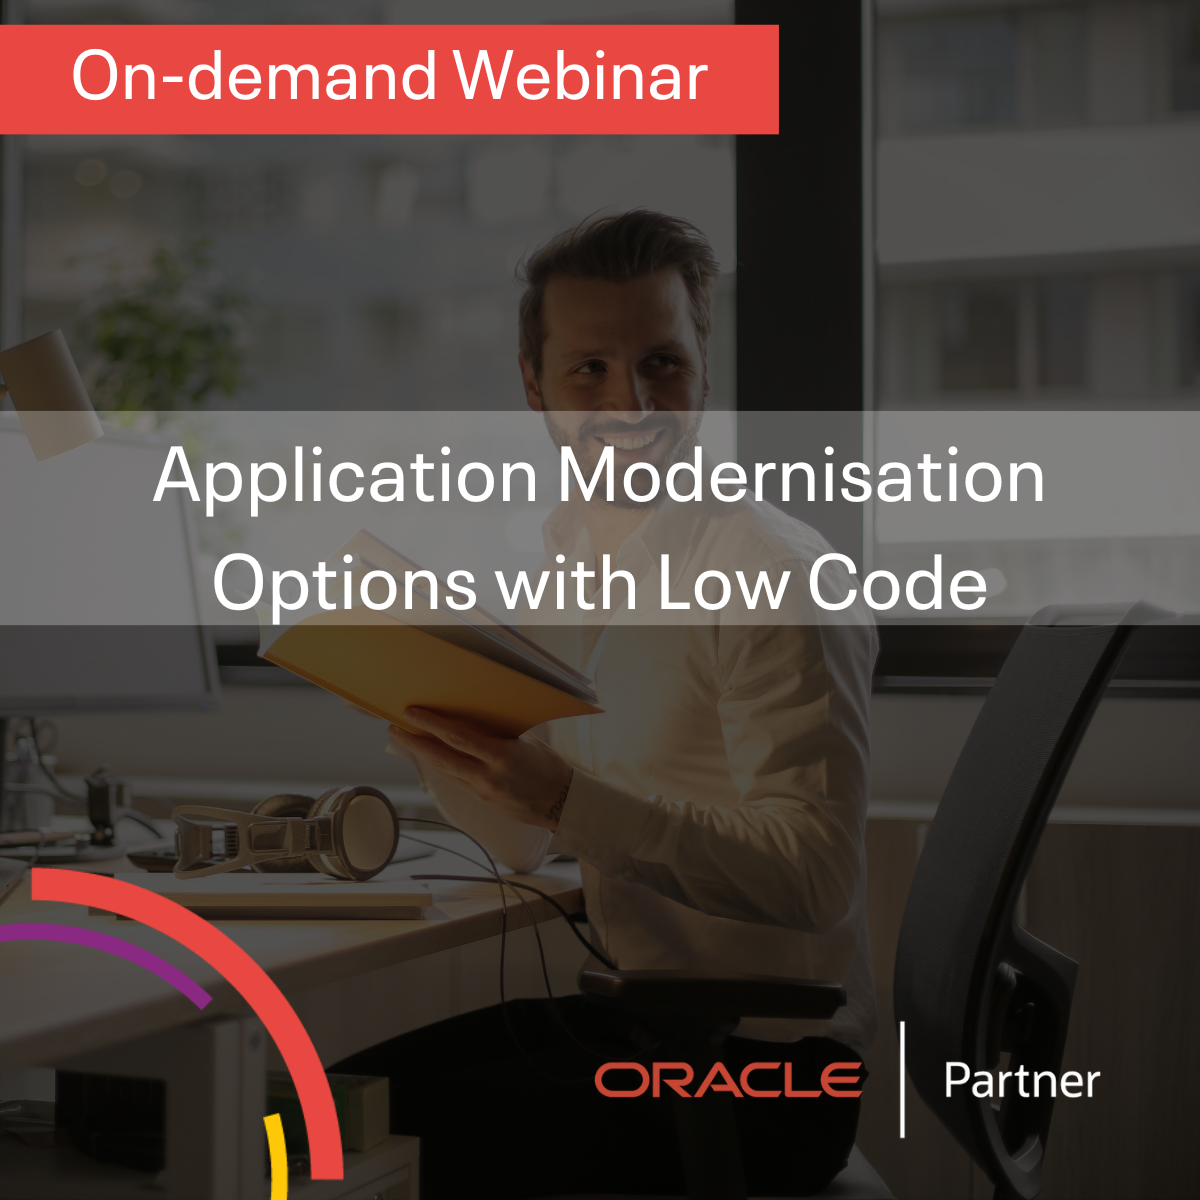 Application-Modernisation-Options-with-Low-Code-on-demand-webinar-cover